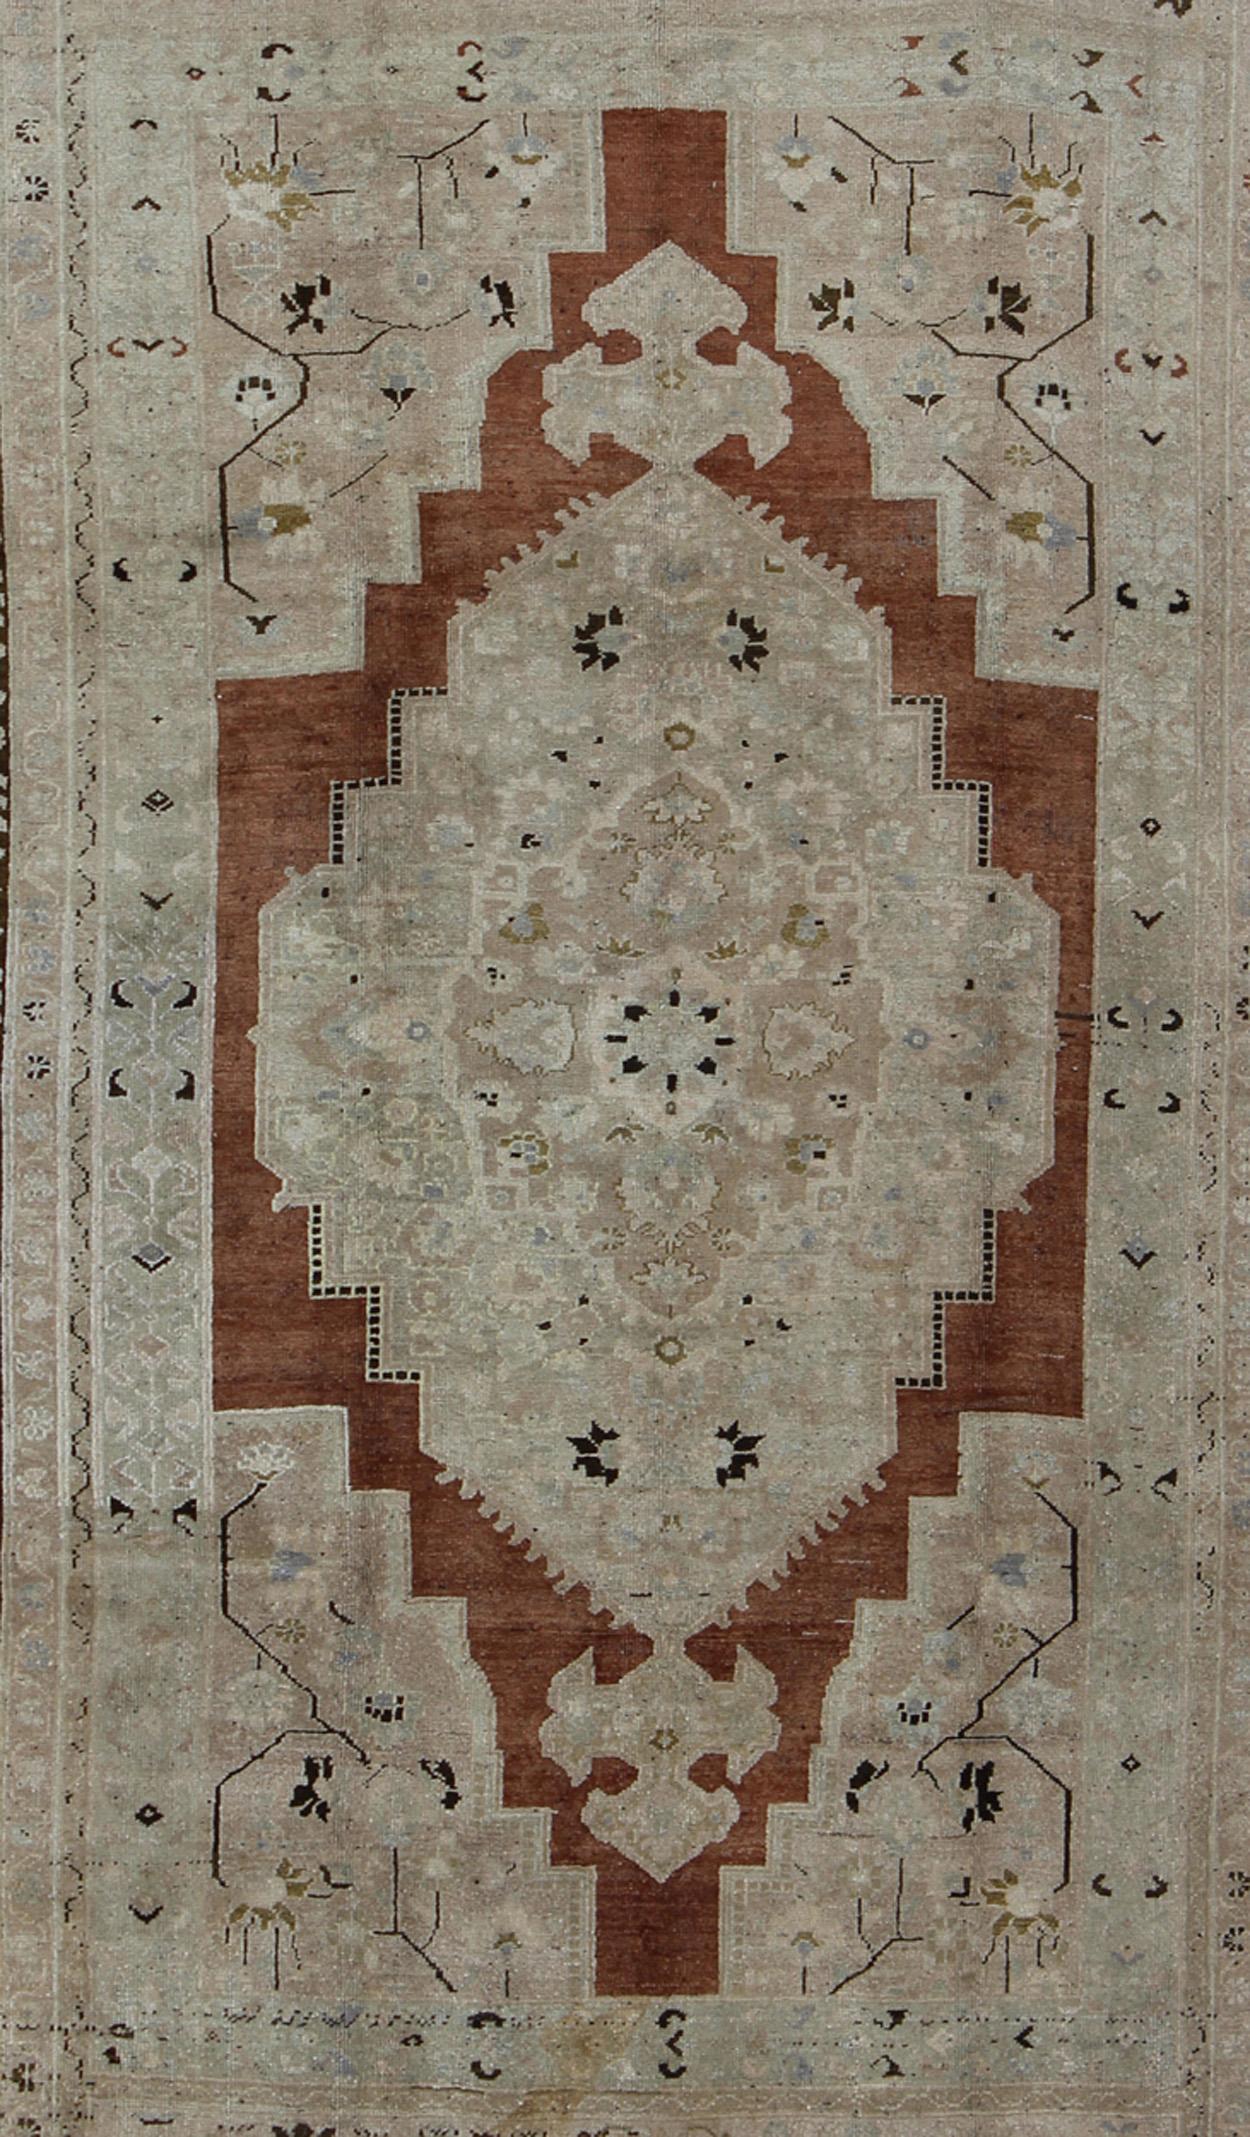 Measures: 7' x 11'5

This beautiful vintage Turkish Oushak carpet features a sub-geometric design and a central medallion. The medallion features Sienna color which is surrounded by taupe, beige and very pale green tones, all surrounded by a